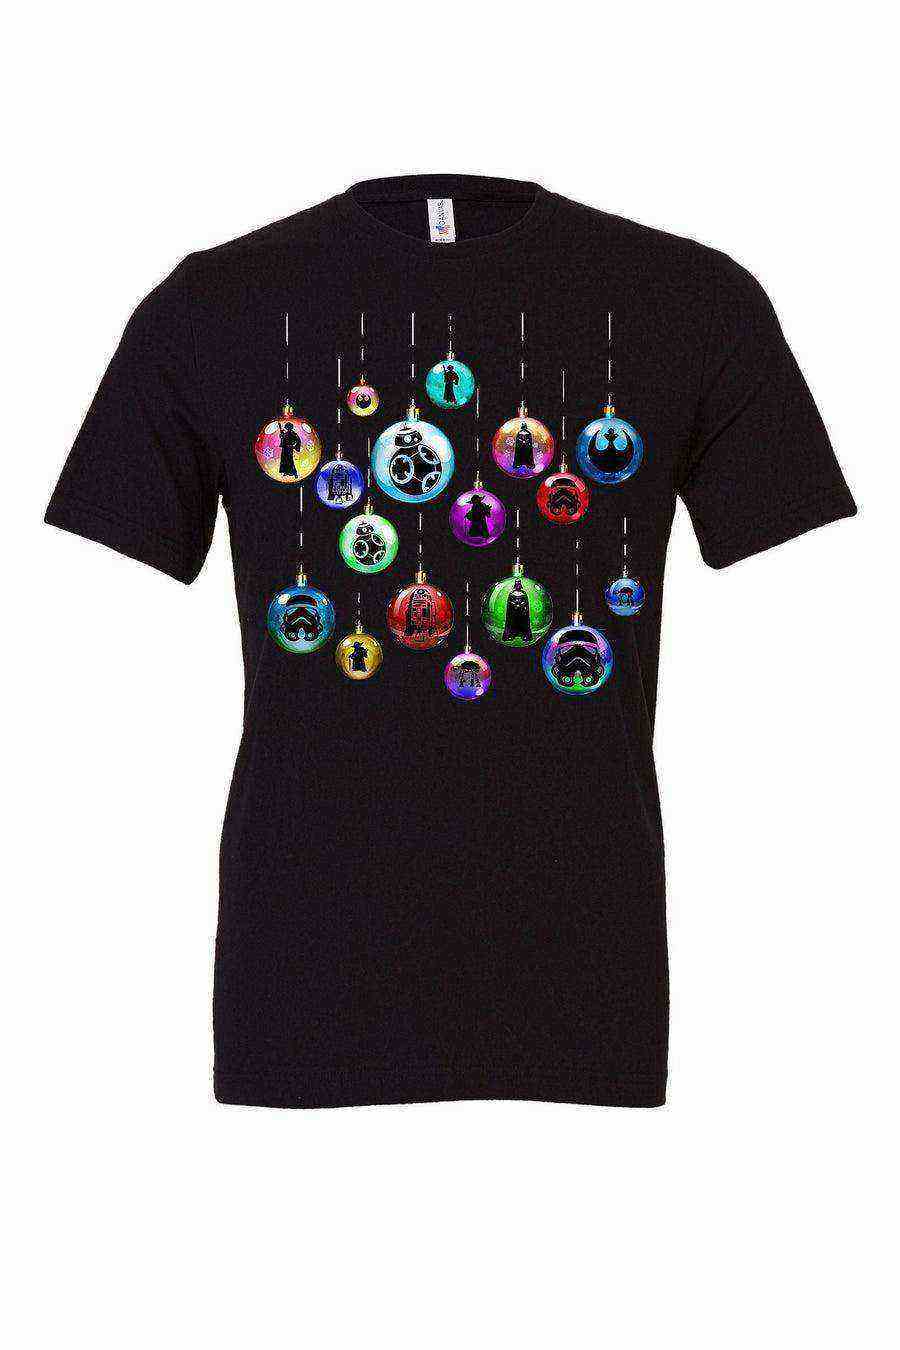 Youth | Star Wars Ornaments Tee - Dylan's Tees